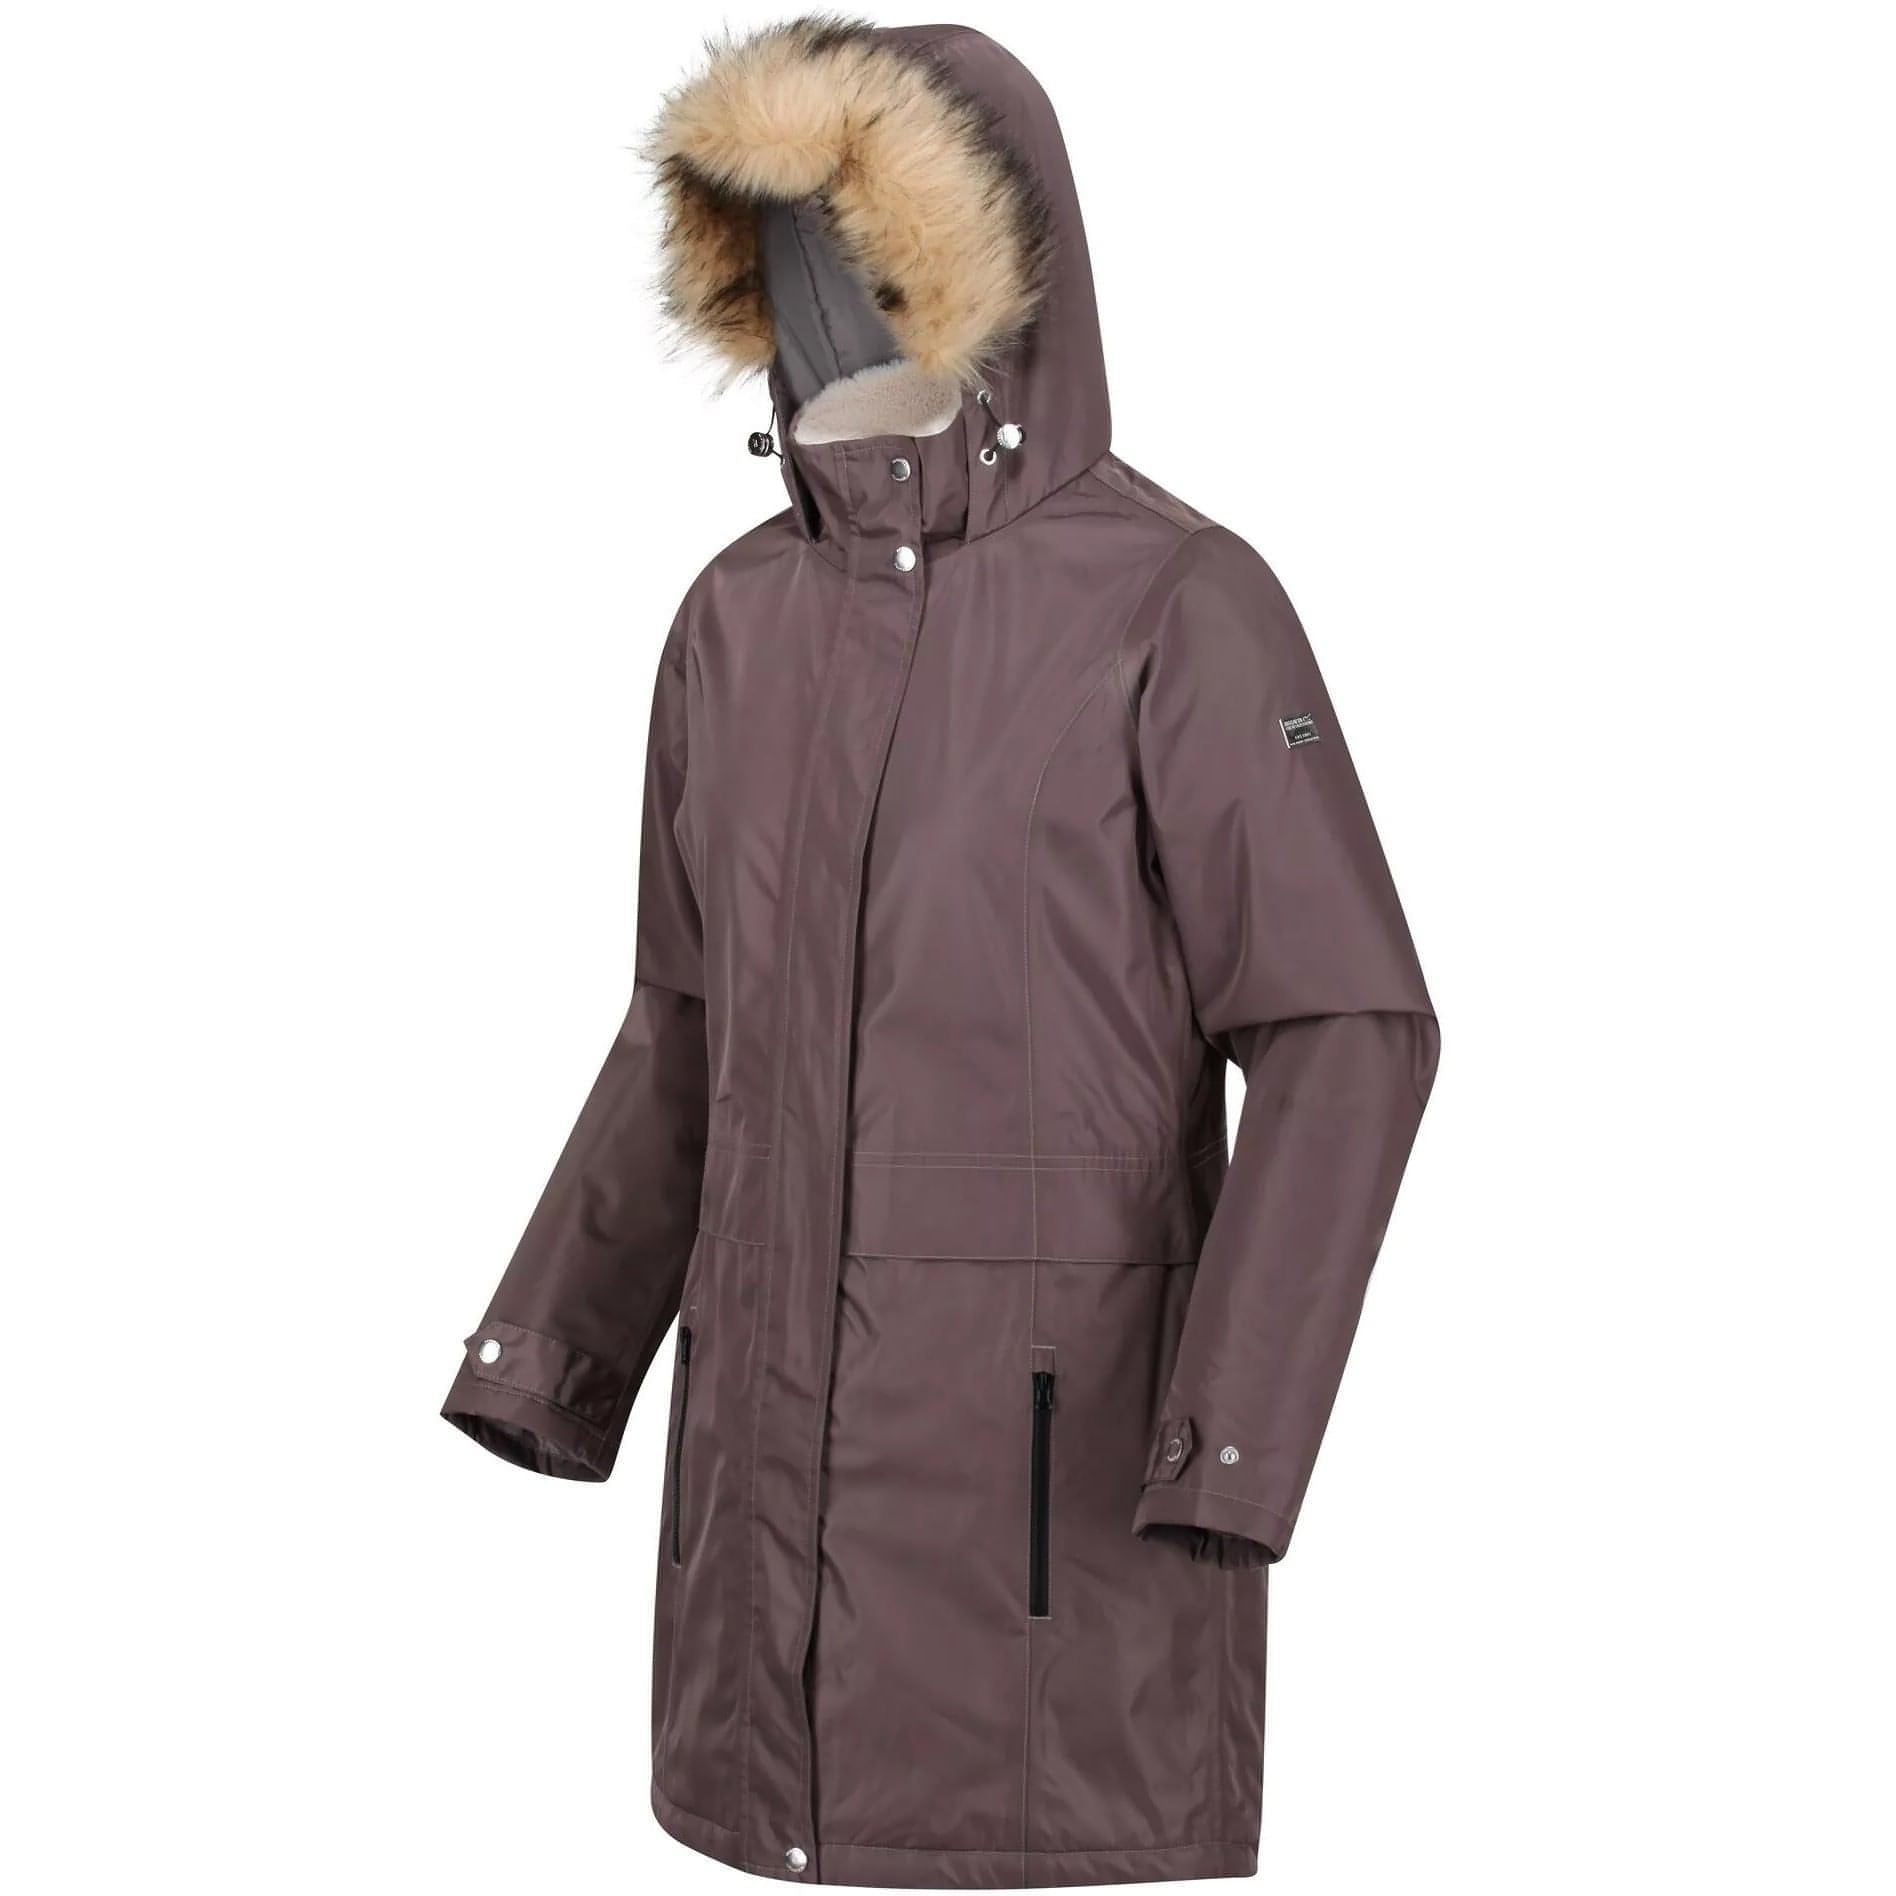 Regatta Lexis Waterproof Insulated Parka Jacket Rwp301  Front - Front View